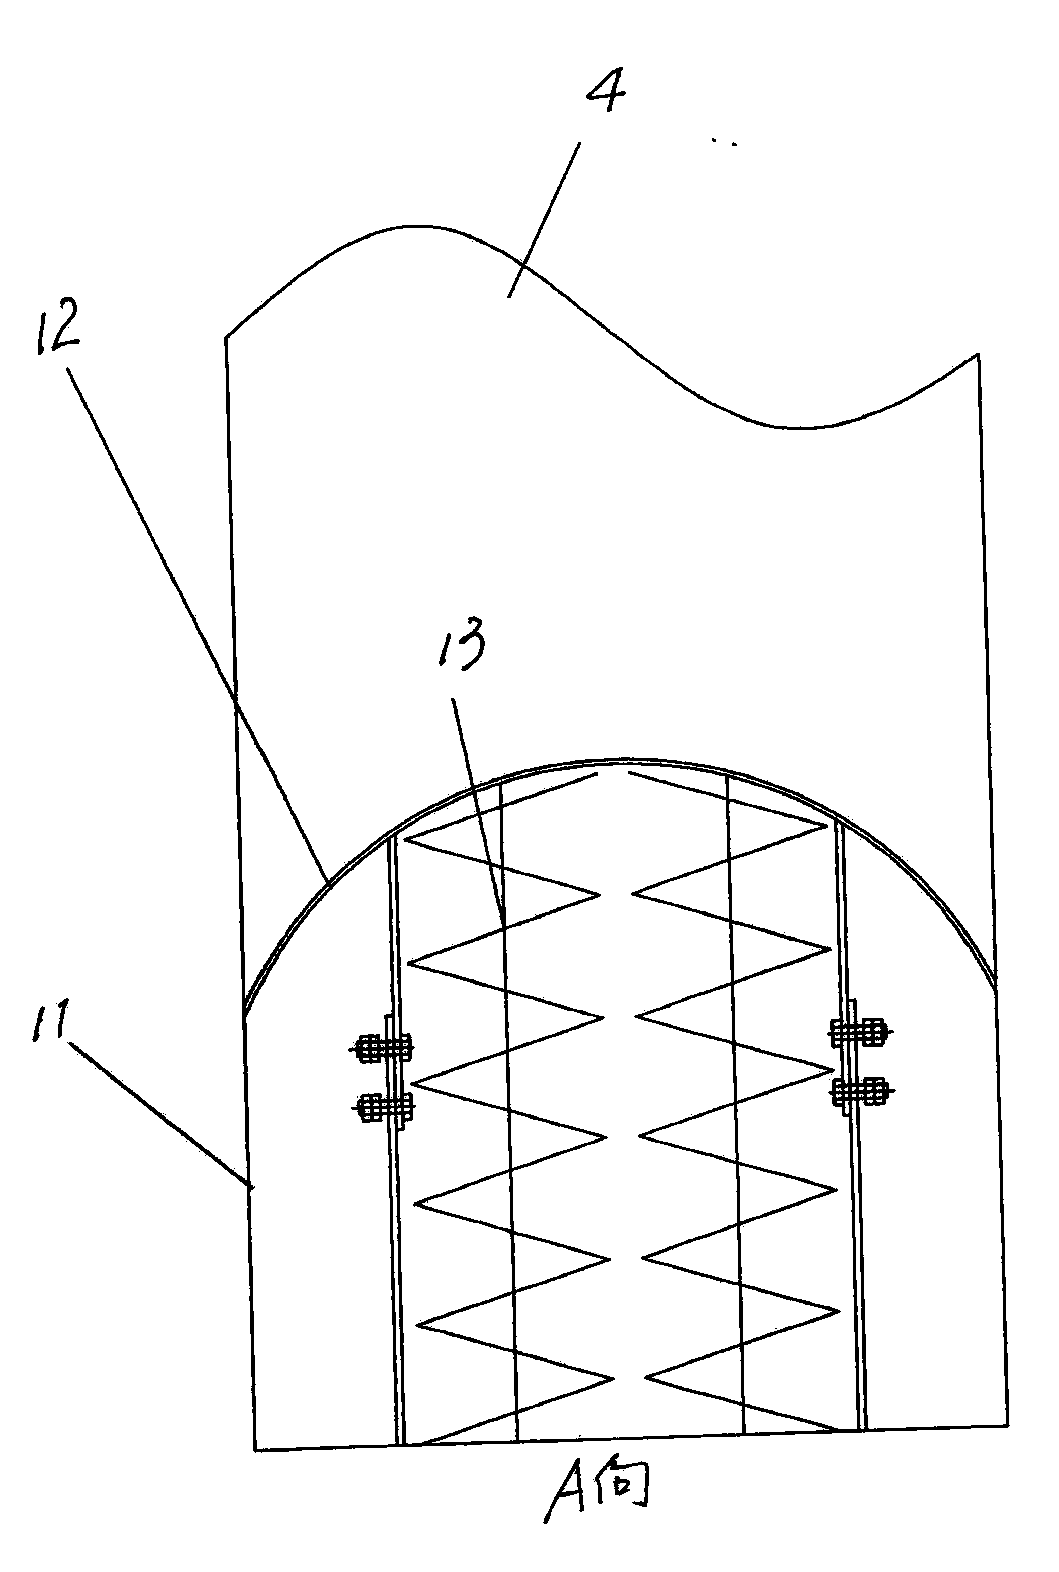 Inclined plate type device for preventing lump coal from being broken in process of entering bin